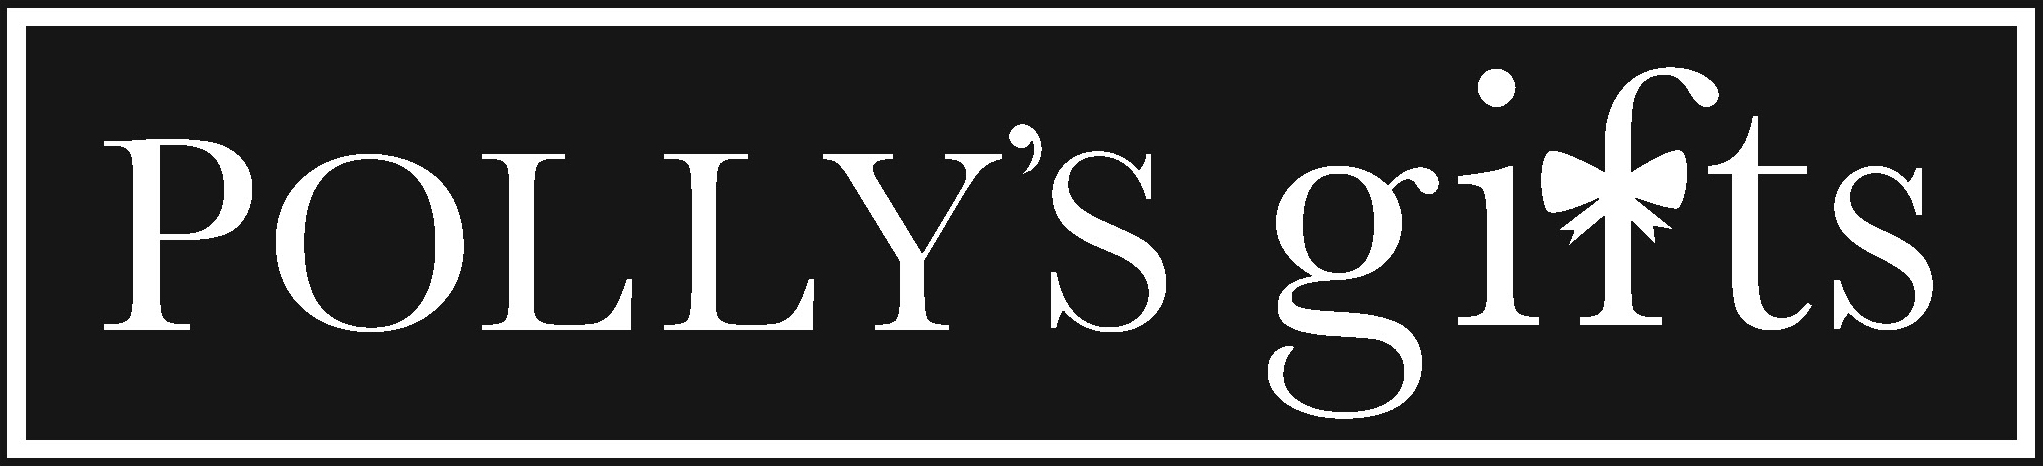 Polly's Gifts logo